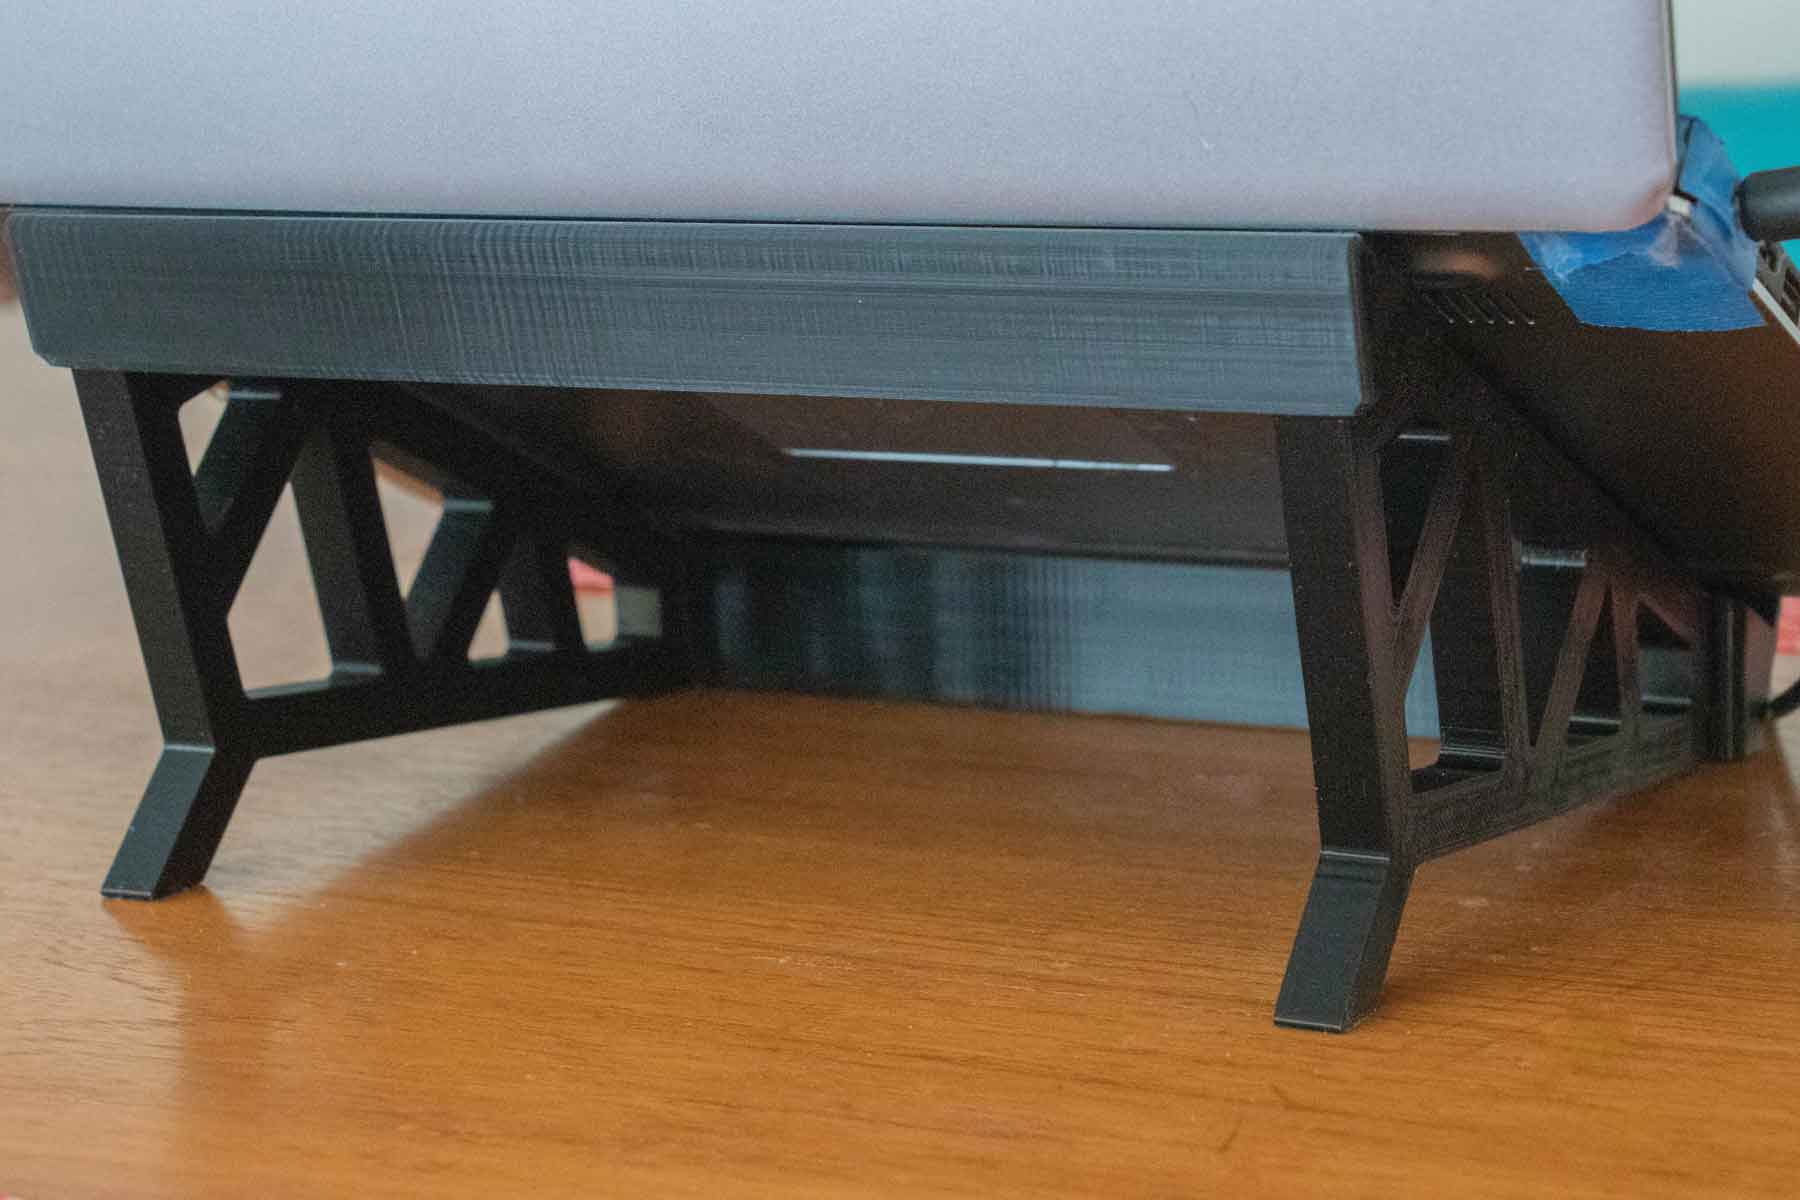 back view of a laptop stand